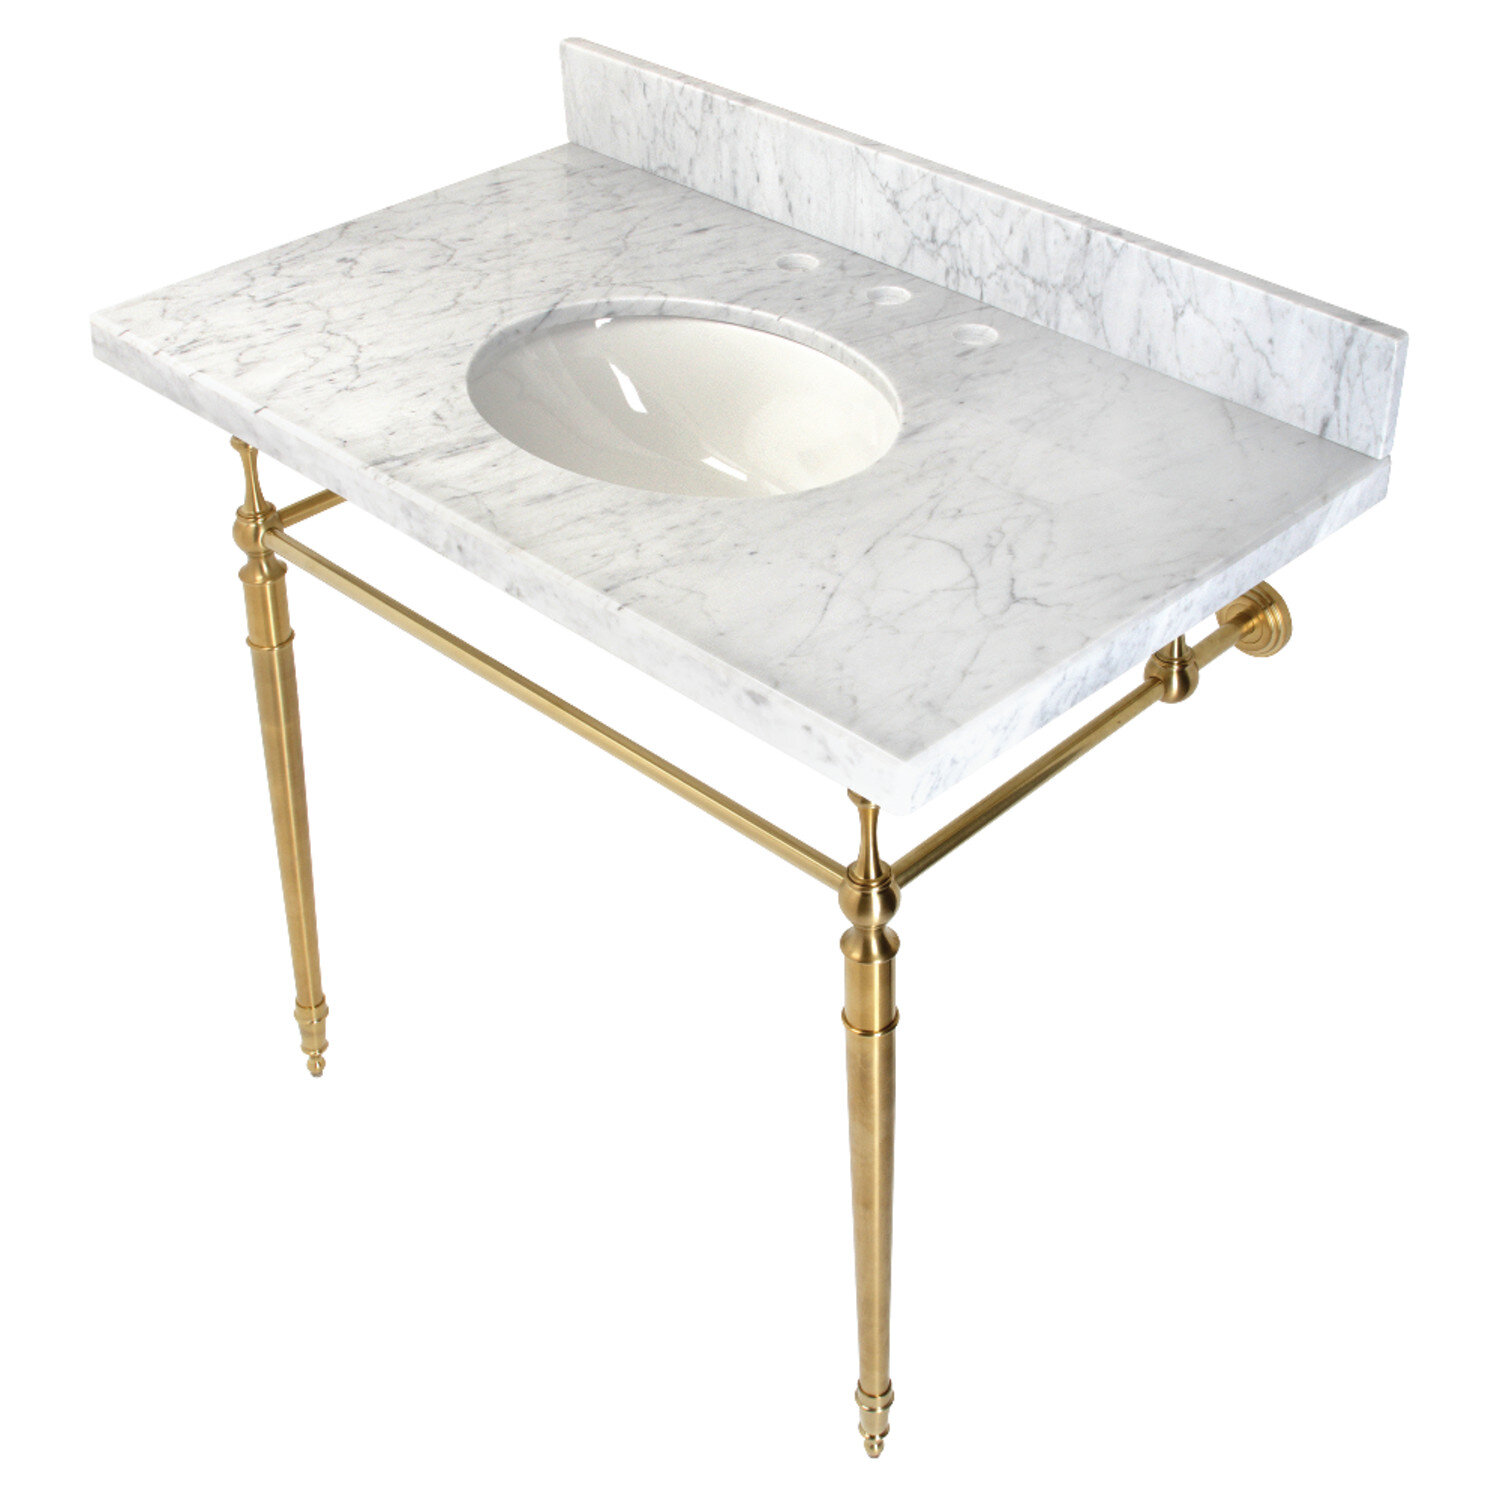 Kingston Brass KVPB3622M87 36 in. Edwardian Console Sink with Brass Legs - 8 in. 3 Hole, Marble White & Brushed Brass